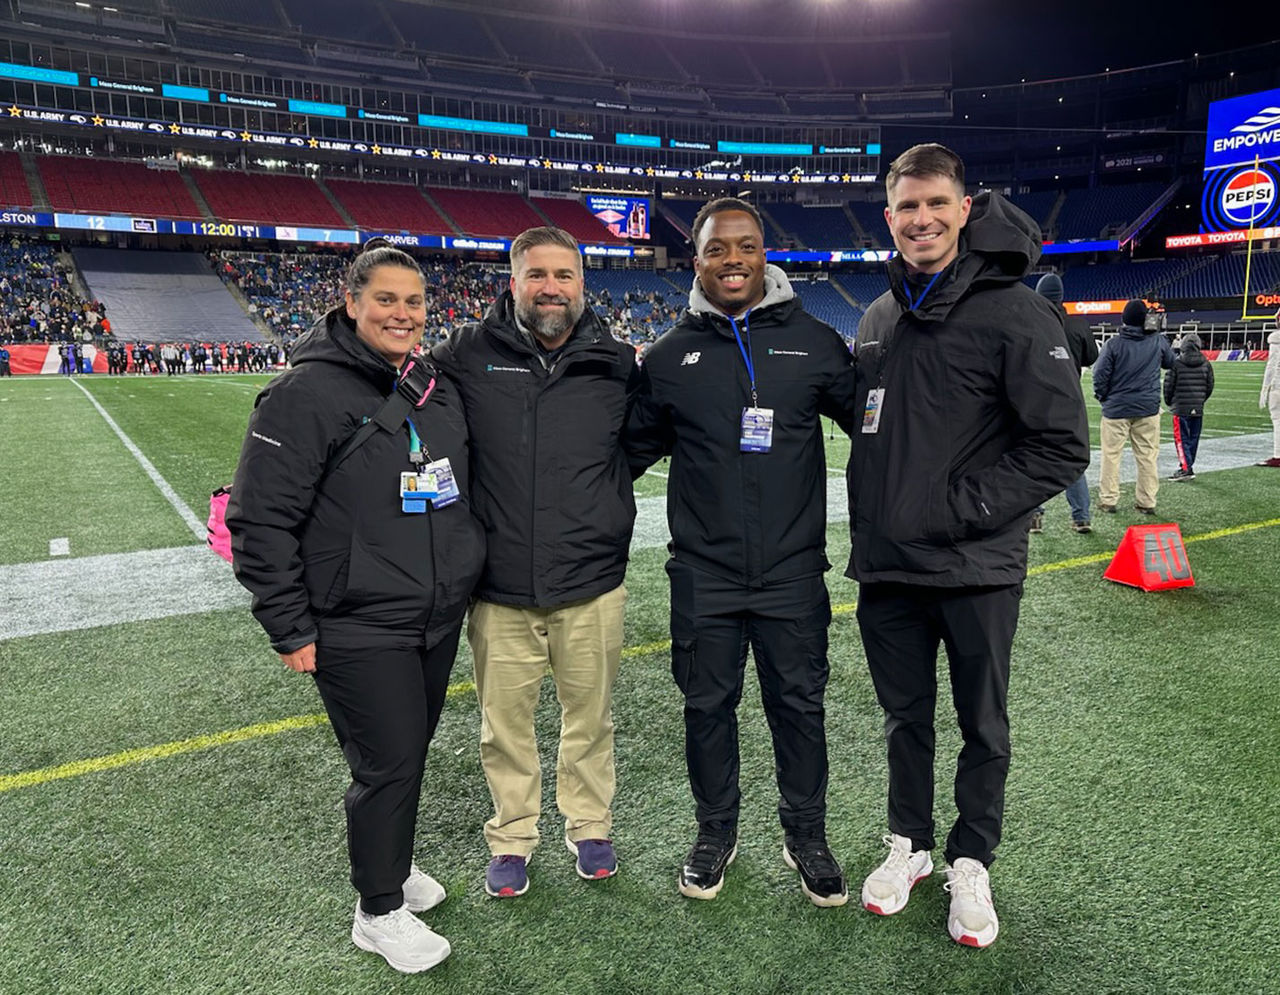 Four members of the Mass General Brigham Sports Medicine team standing together and smiling next to football field